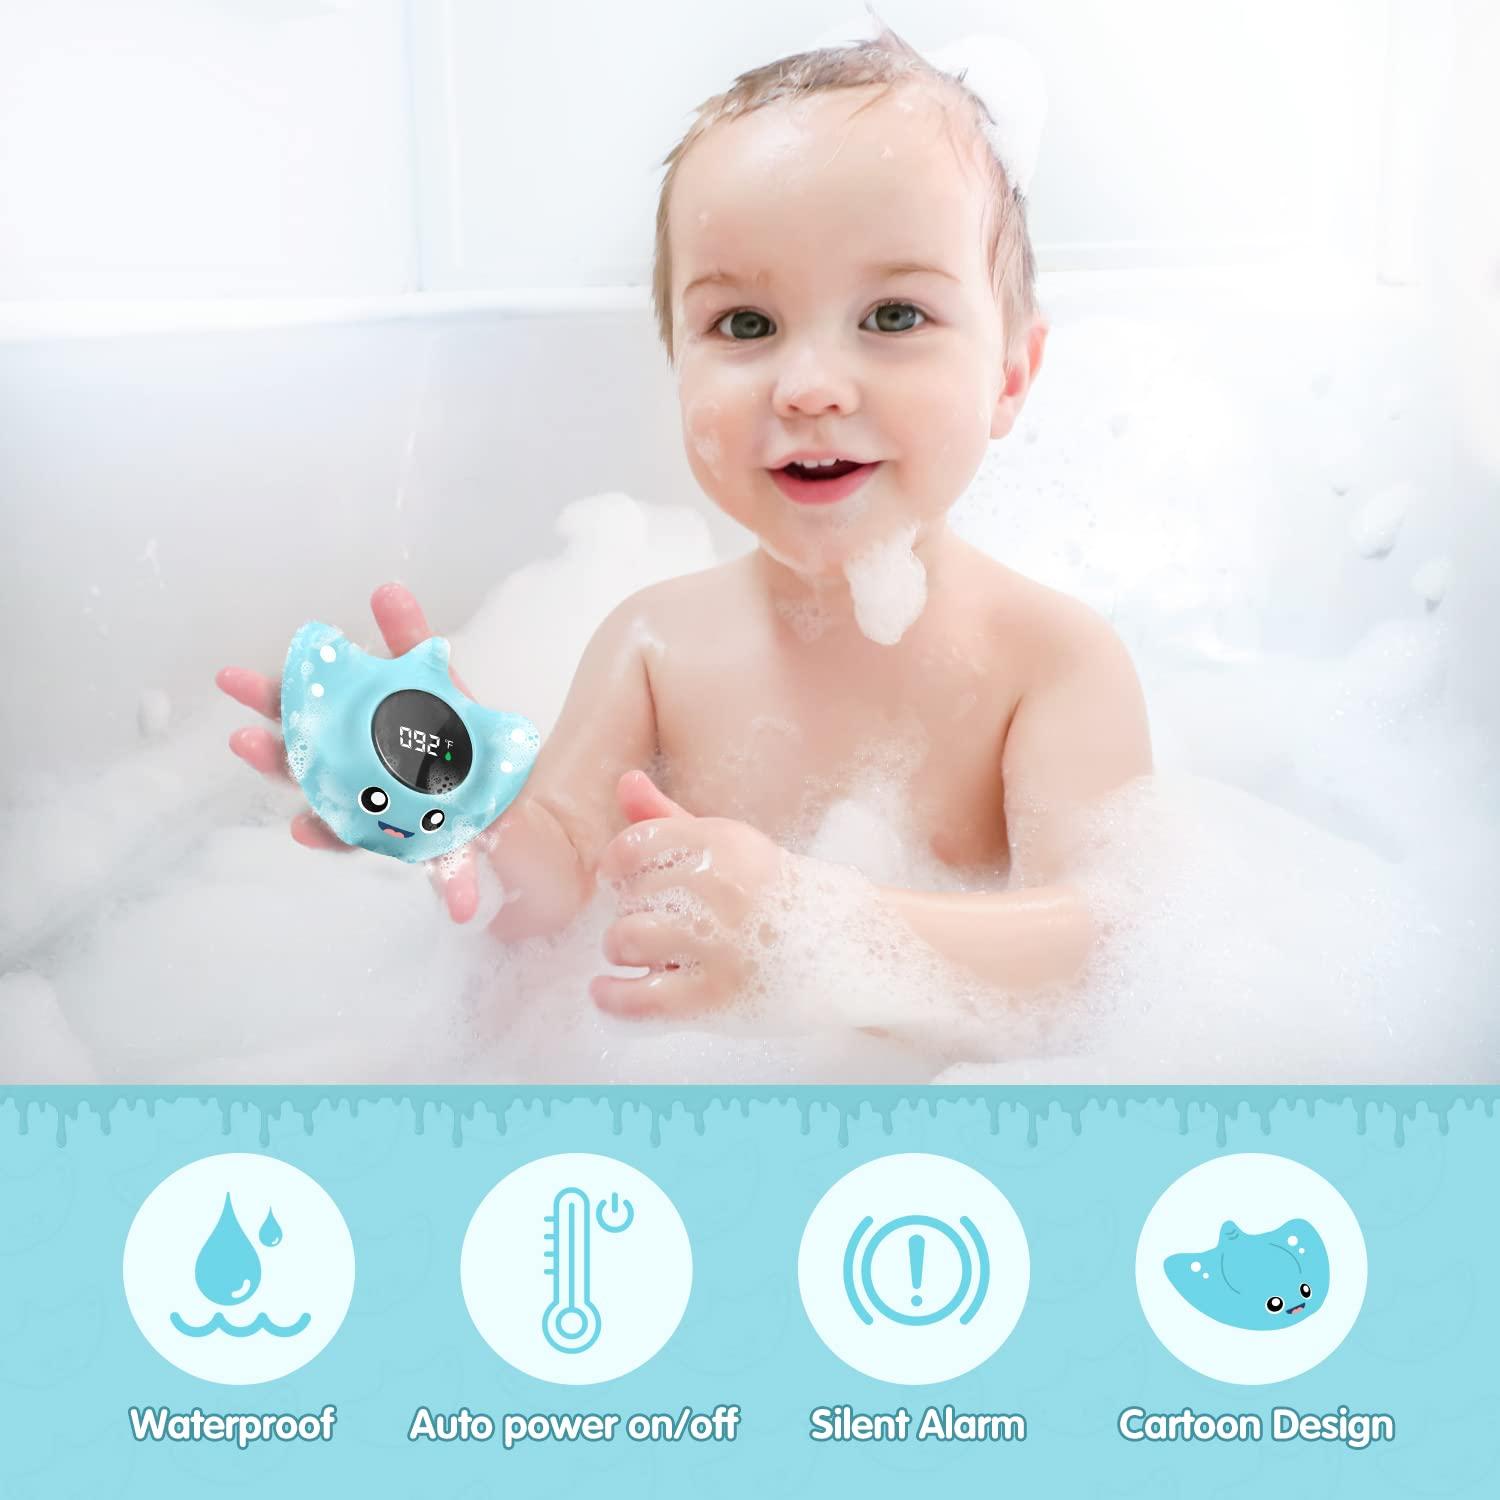 Baby Bath Thermometer - Digital Bathtub Temperature Thermometer, Kids  Bathroom Safety Bathing Floating Toy for Infant Newborn, Silent Color  Warning